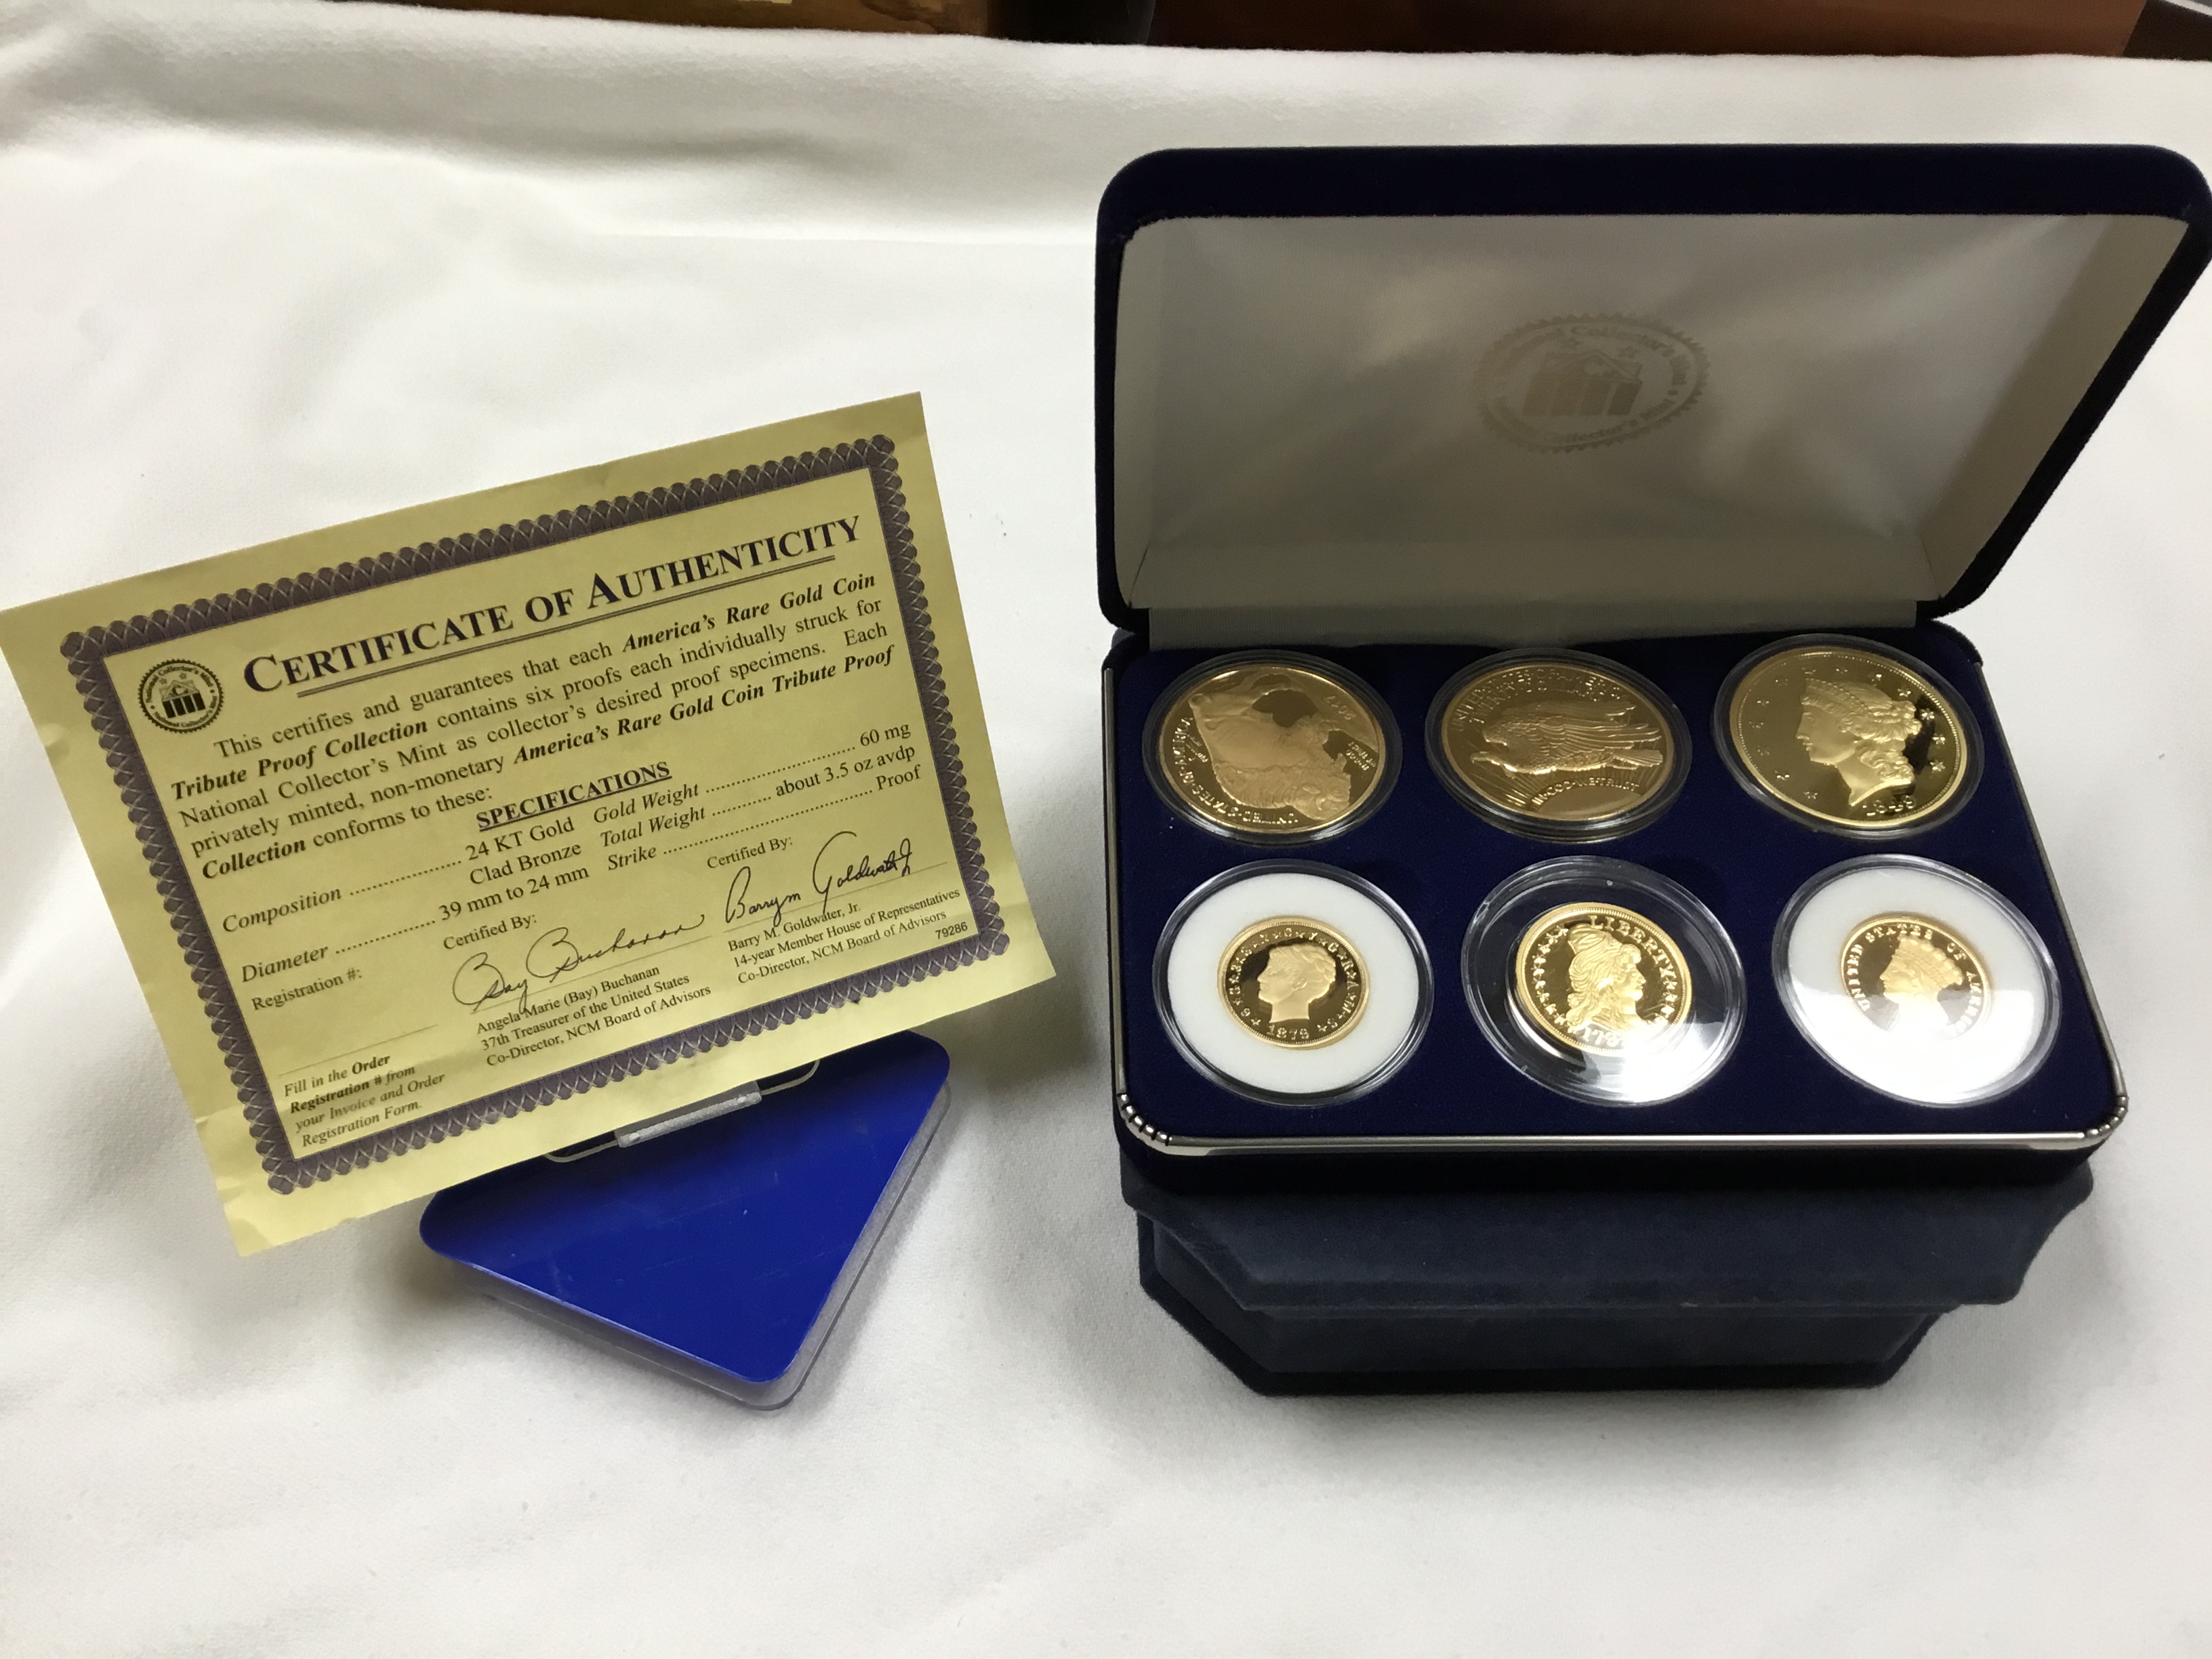 National Collectors Mint Rare Gold Coin Tribute Proof Gold 6 Coin